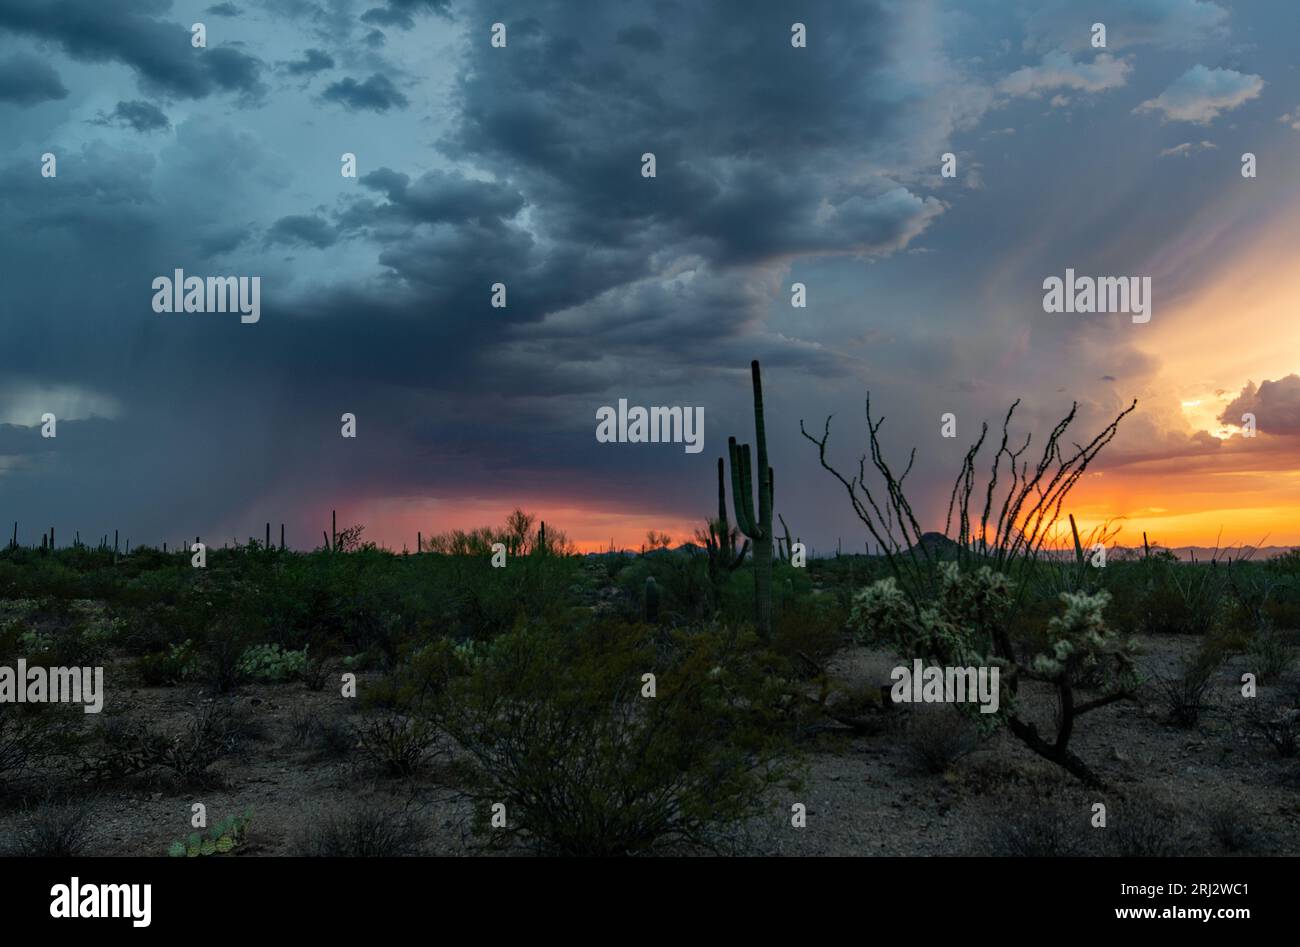 A monsoon storm at sunset in the sonoran desert Stock Photo